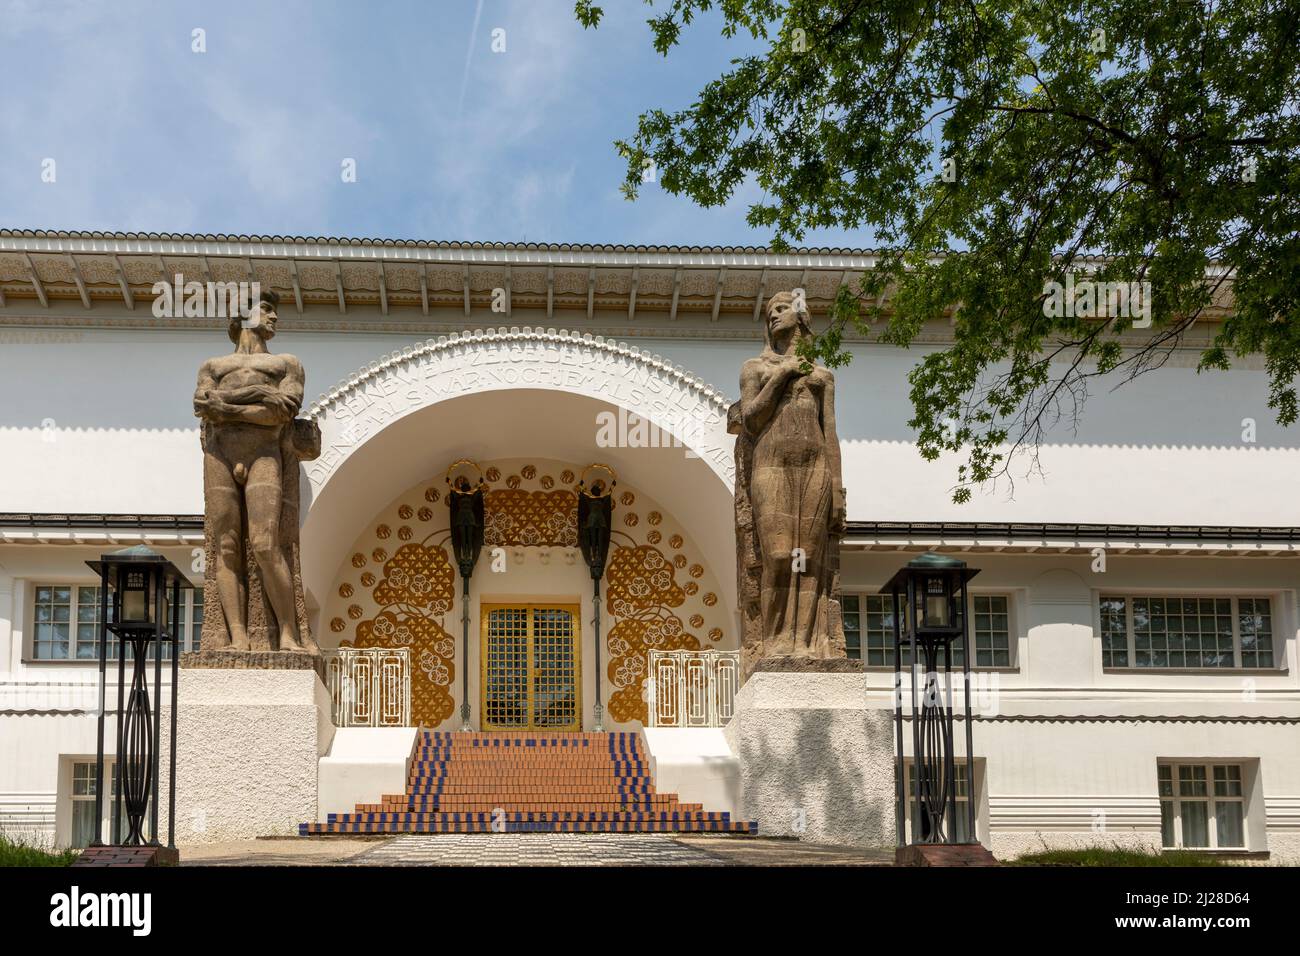 Darmstadt, Germany - June 28, 2021: entrance to the Ernst-Ludwig House at the mathildenhoehe in Darmstadt, Germany. Architect Joseph Maria Olbricht bu Stock Photo